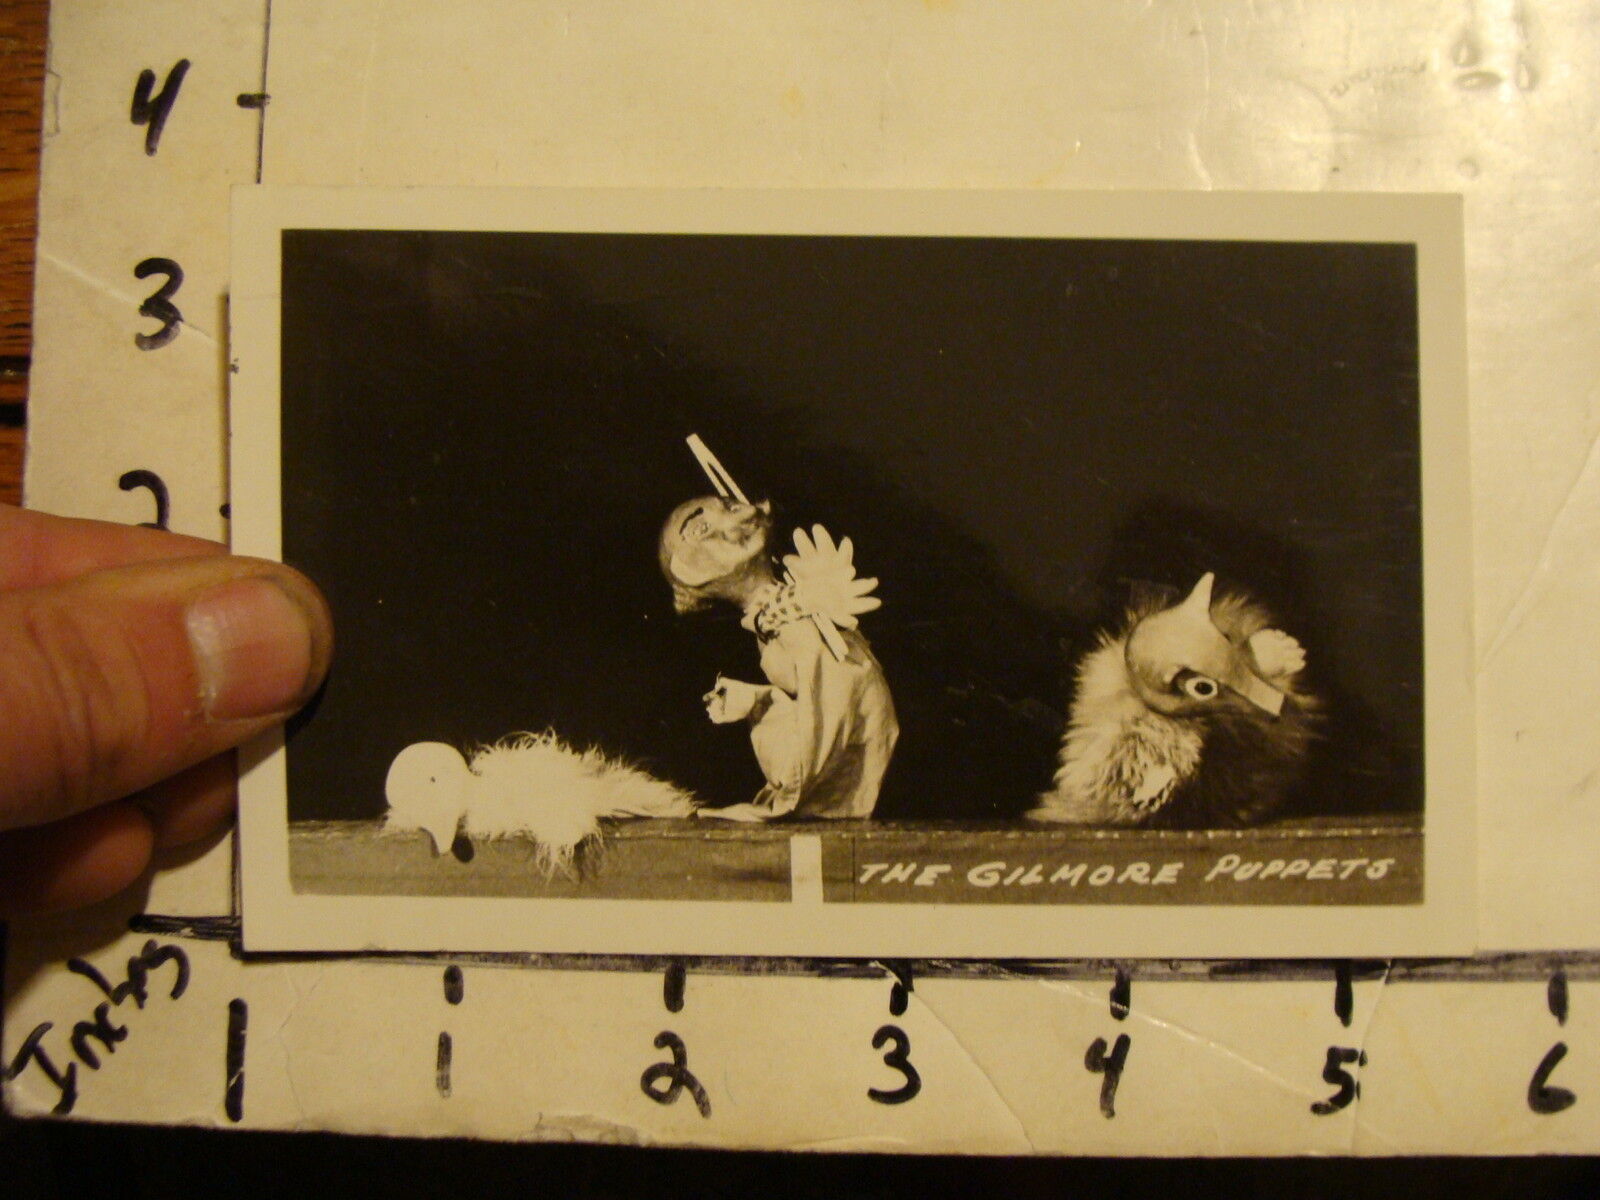 Vintage MARIONETTE & PUPPET Photo postcard:1957, THE GILMORE PUPPETS